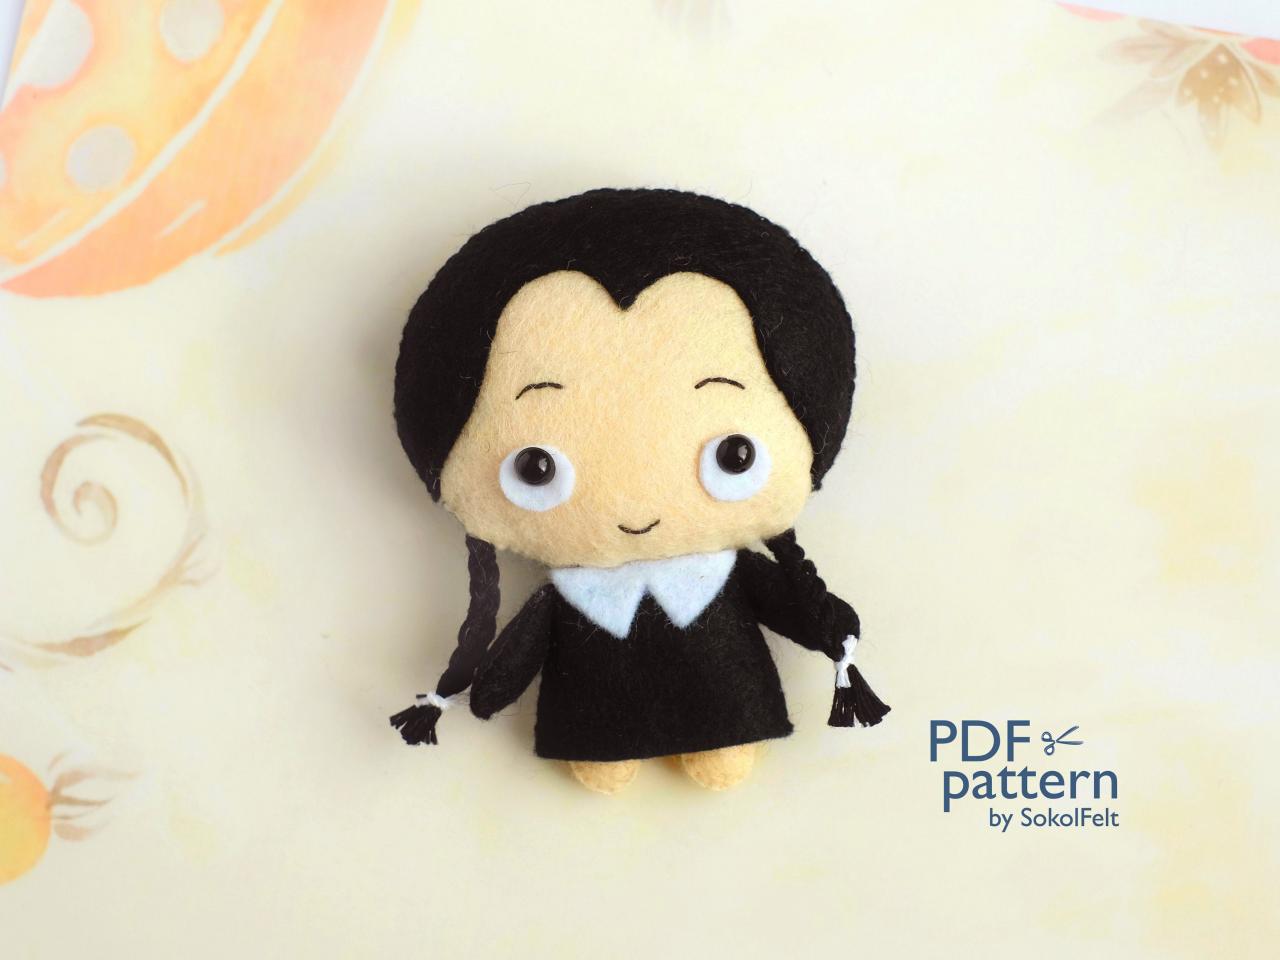 Cute Wednesday Addams Toy Pdf Pattern, Addams Family, Easy To Make Halloween Toy, Halloween Ornament